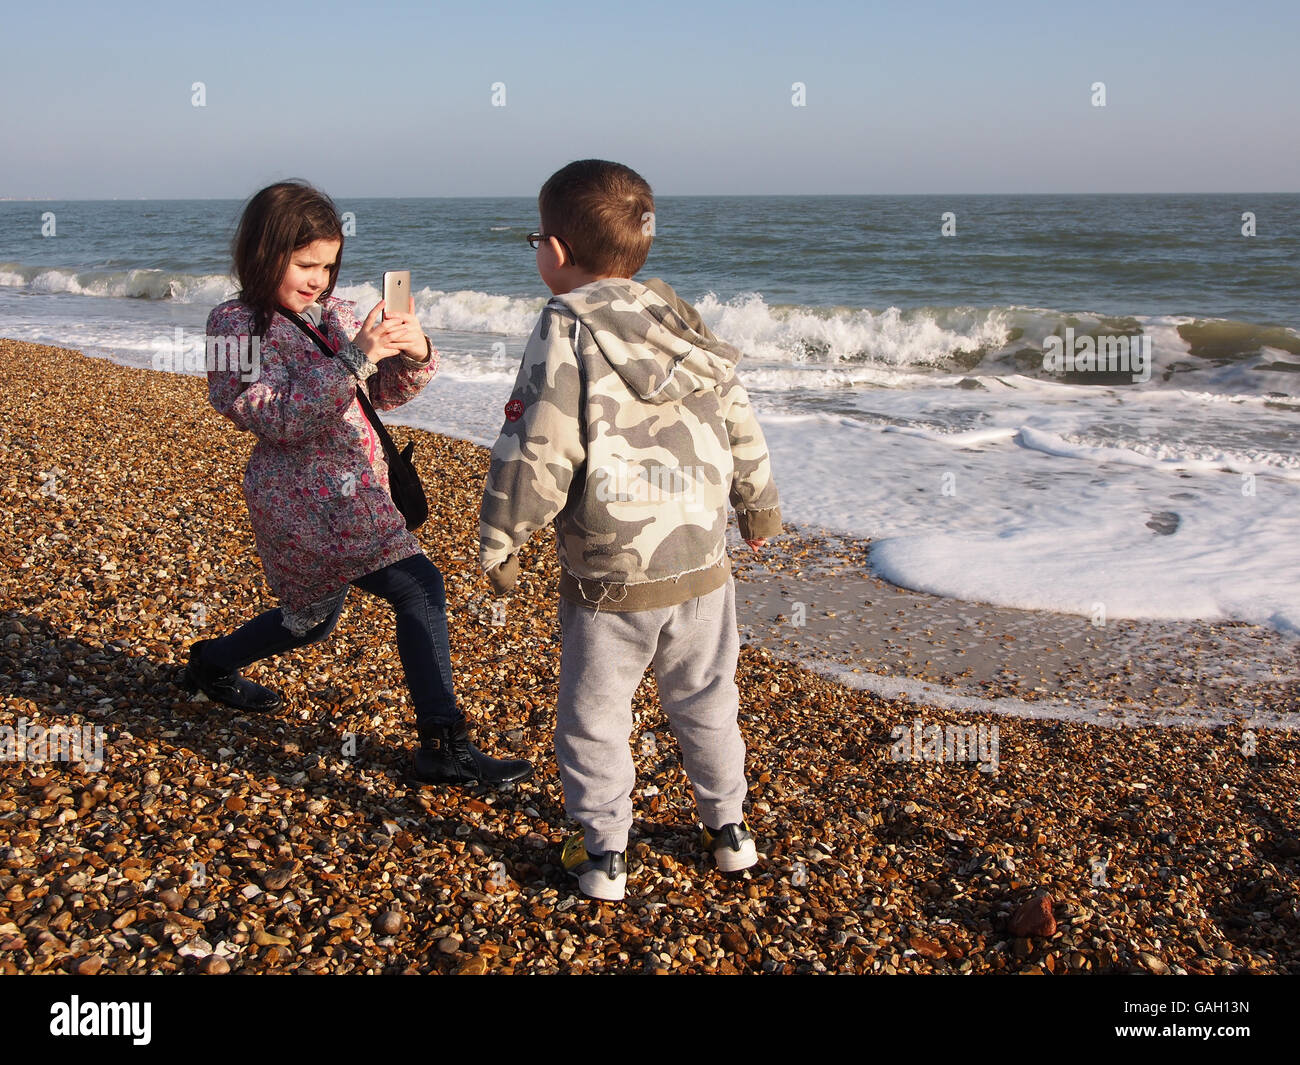 A young girl taking photographs of her brother on her smart phone on the beach Stock Photo